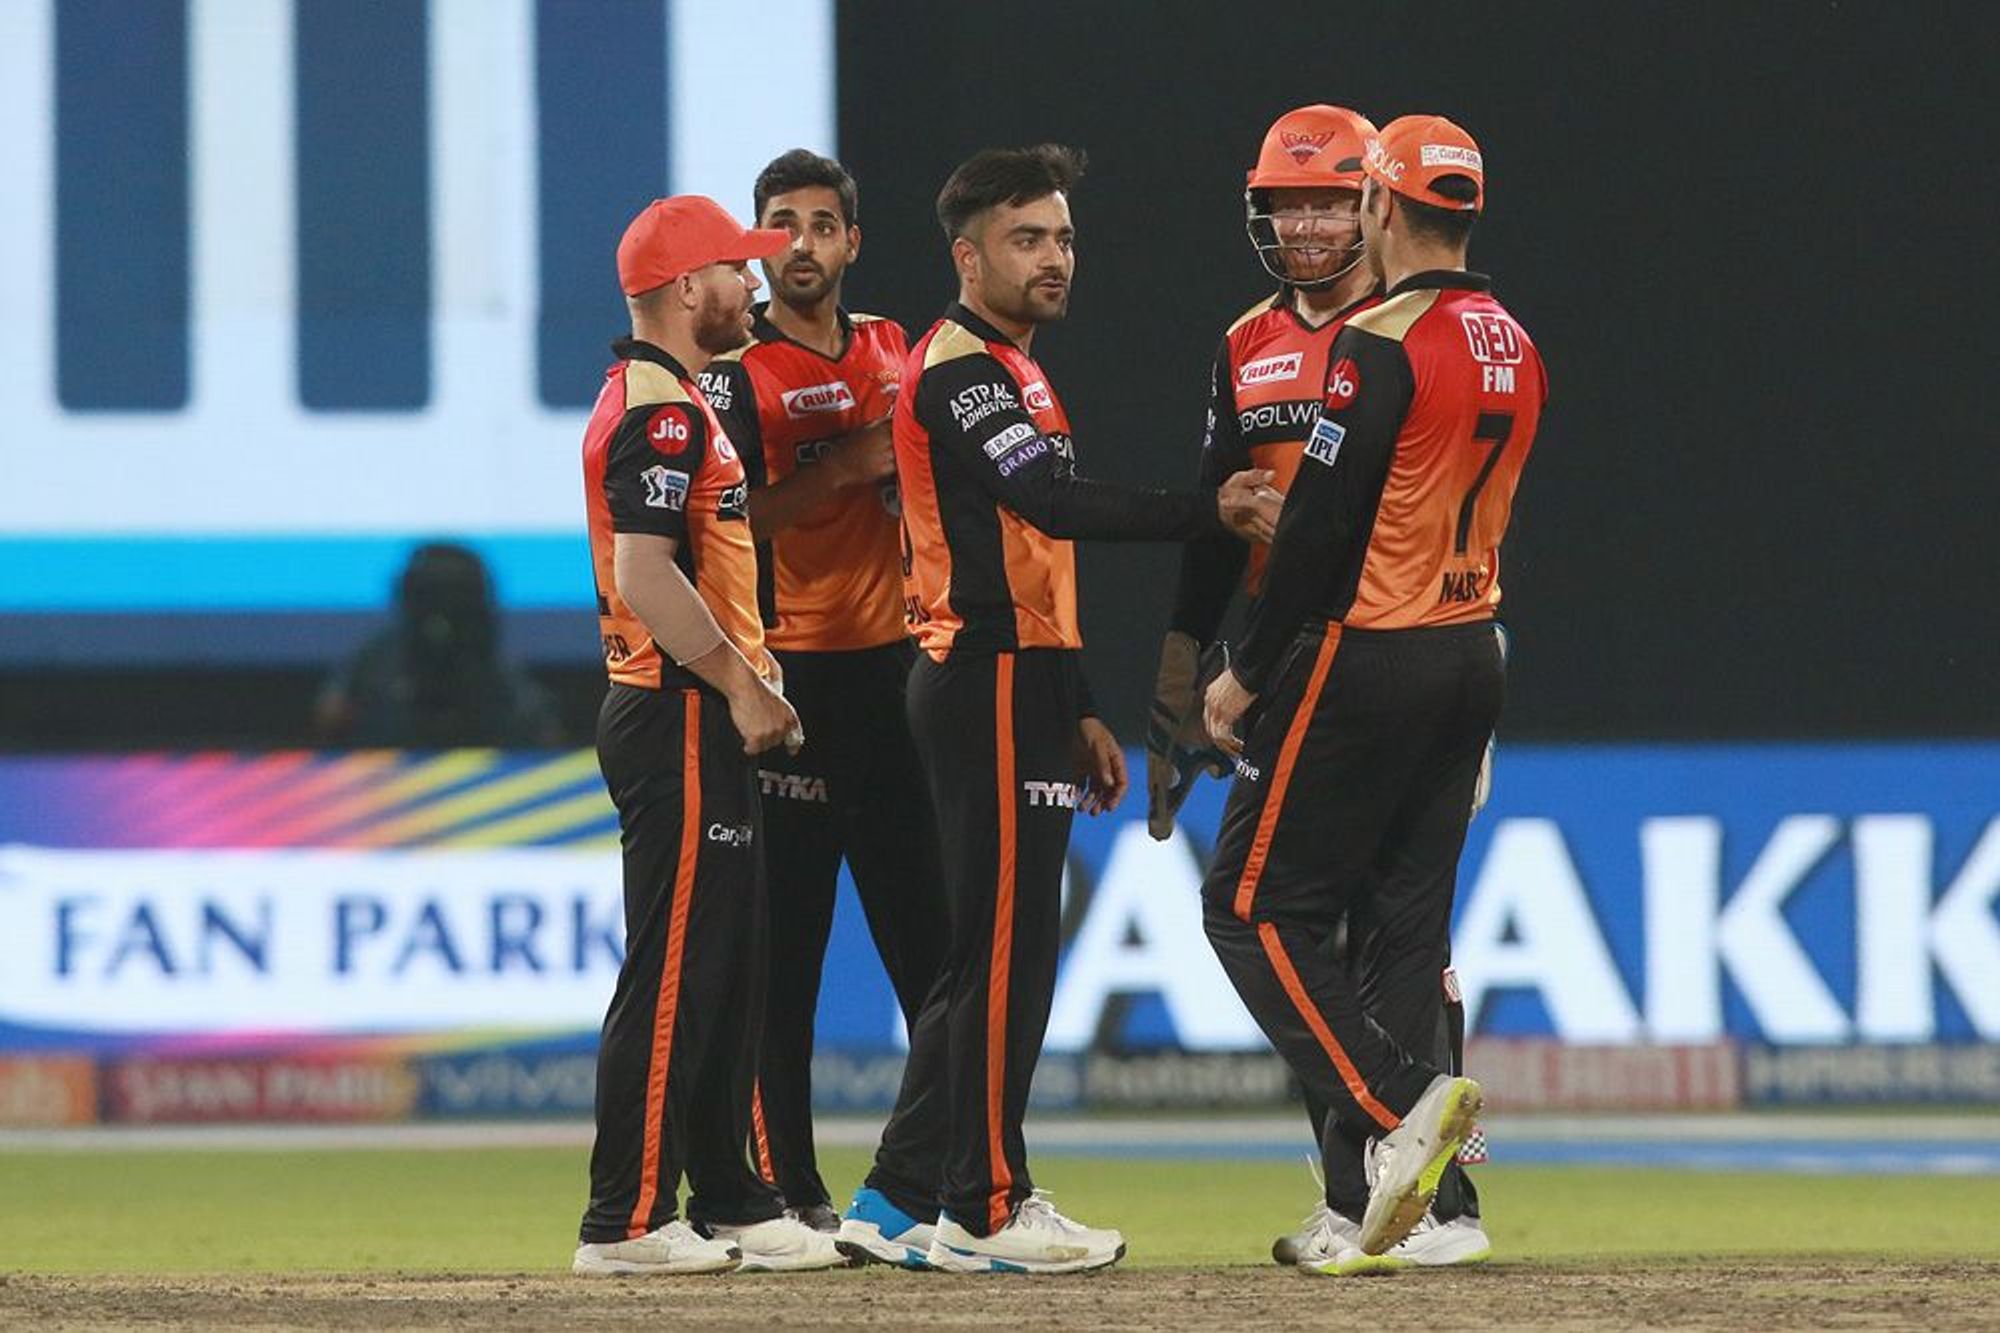 RCB vs SRH | Player Ratings - Rashid Khan, Mohammed Nabi failure results in Sunrisers Hyderabad losing to Royal Challengers Bangalore by four wickets